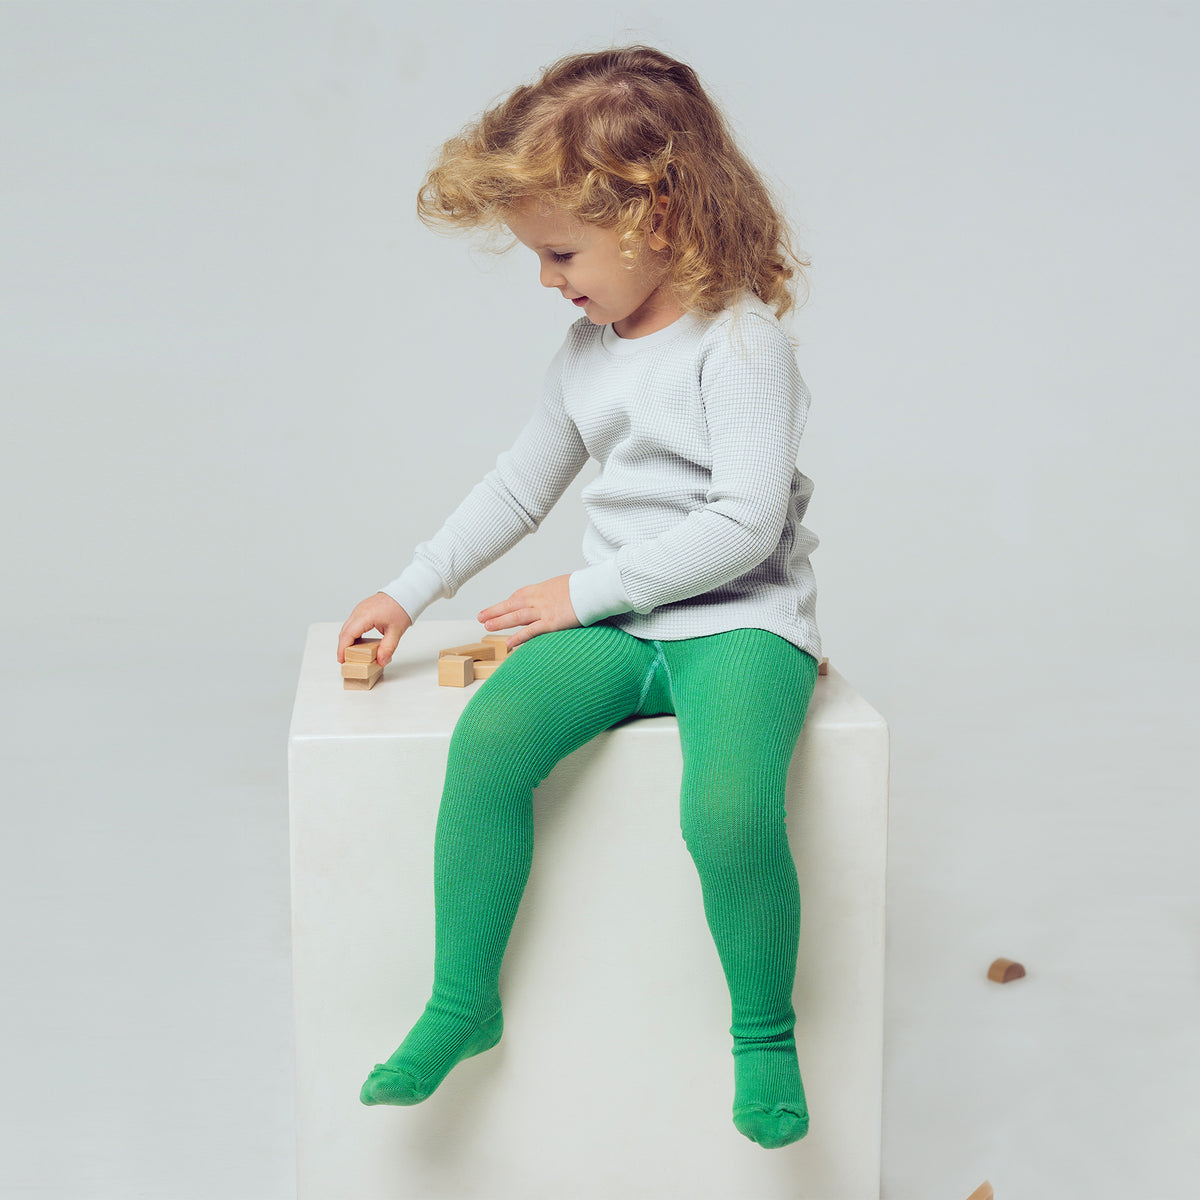 PEQNE Footed Children Tights in Spring Green